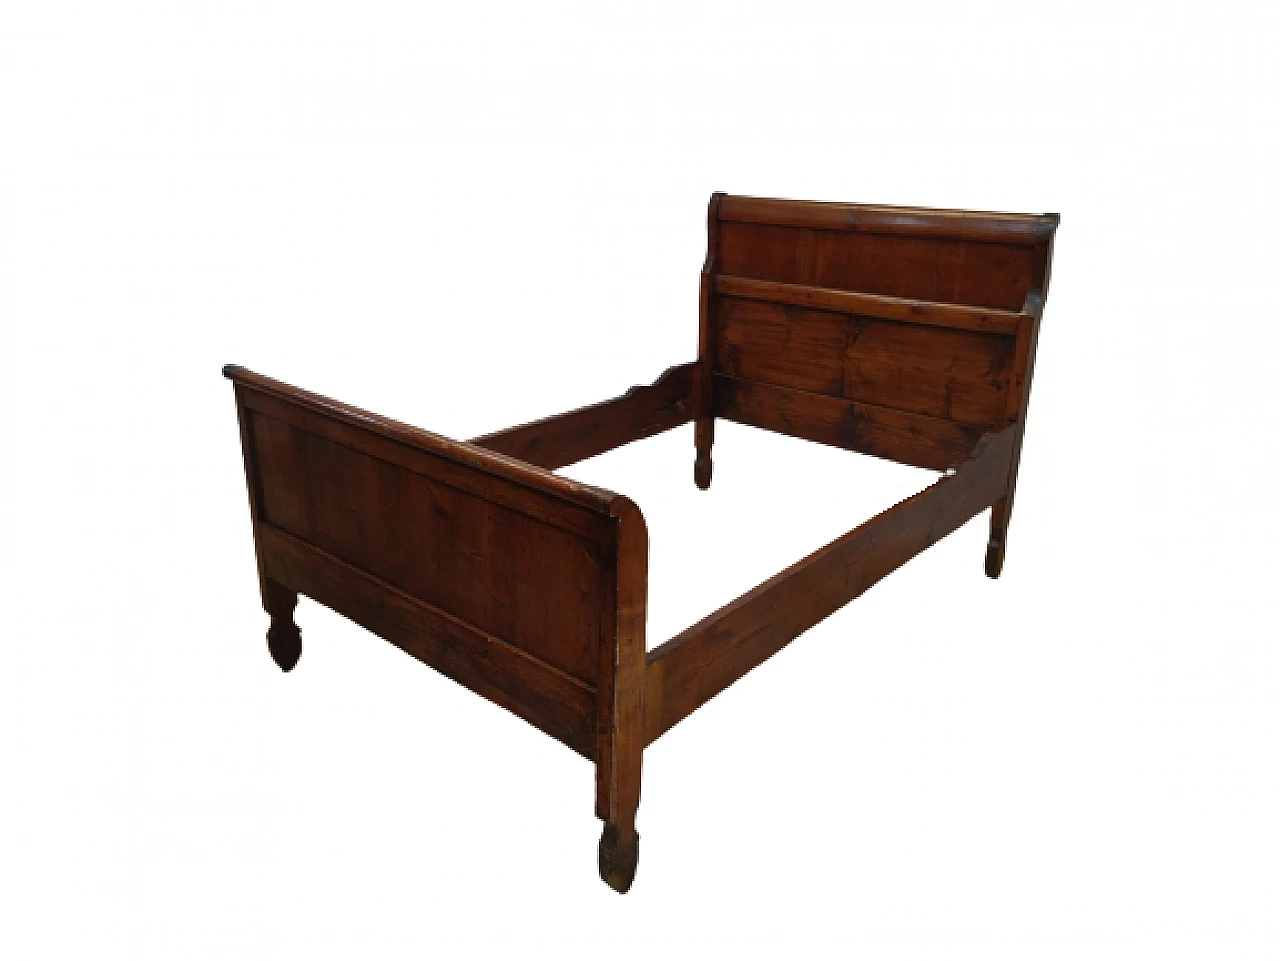 Louis Philippe walnut-stained solid spruce bed, mid-19th century 20